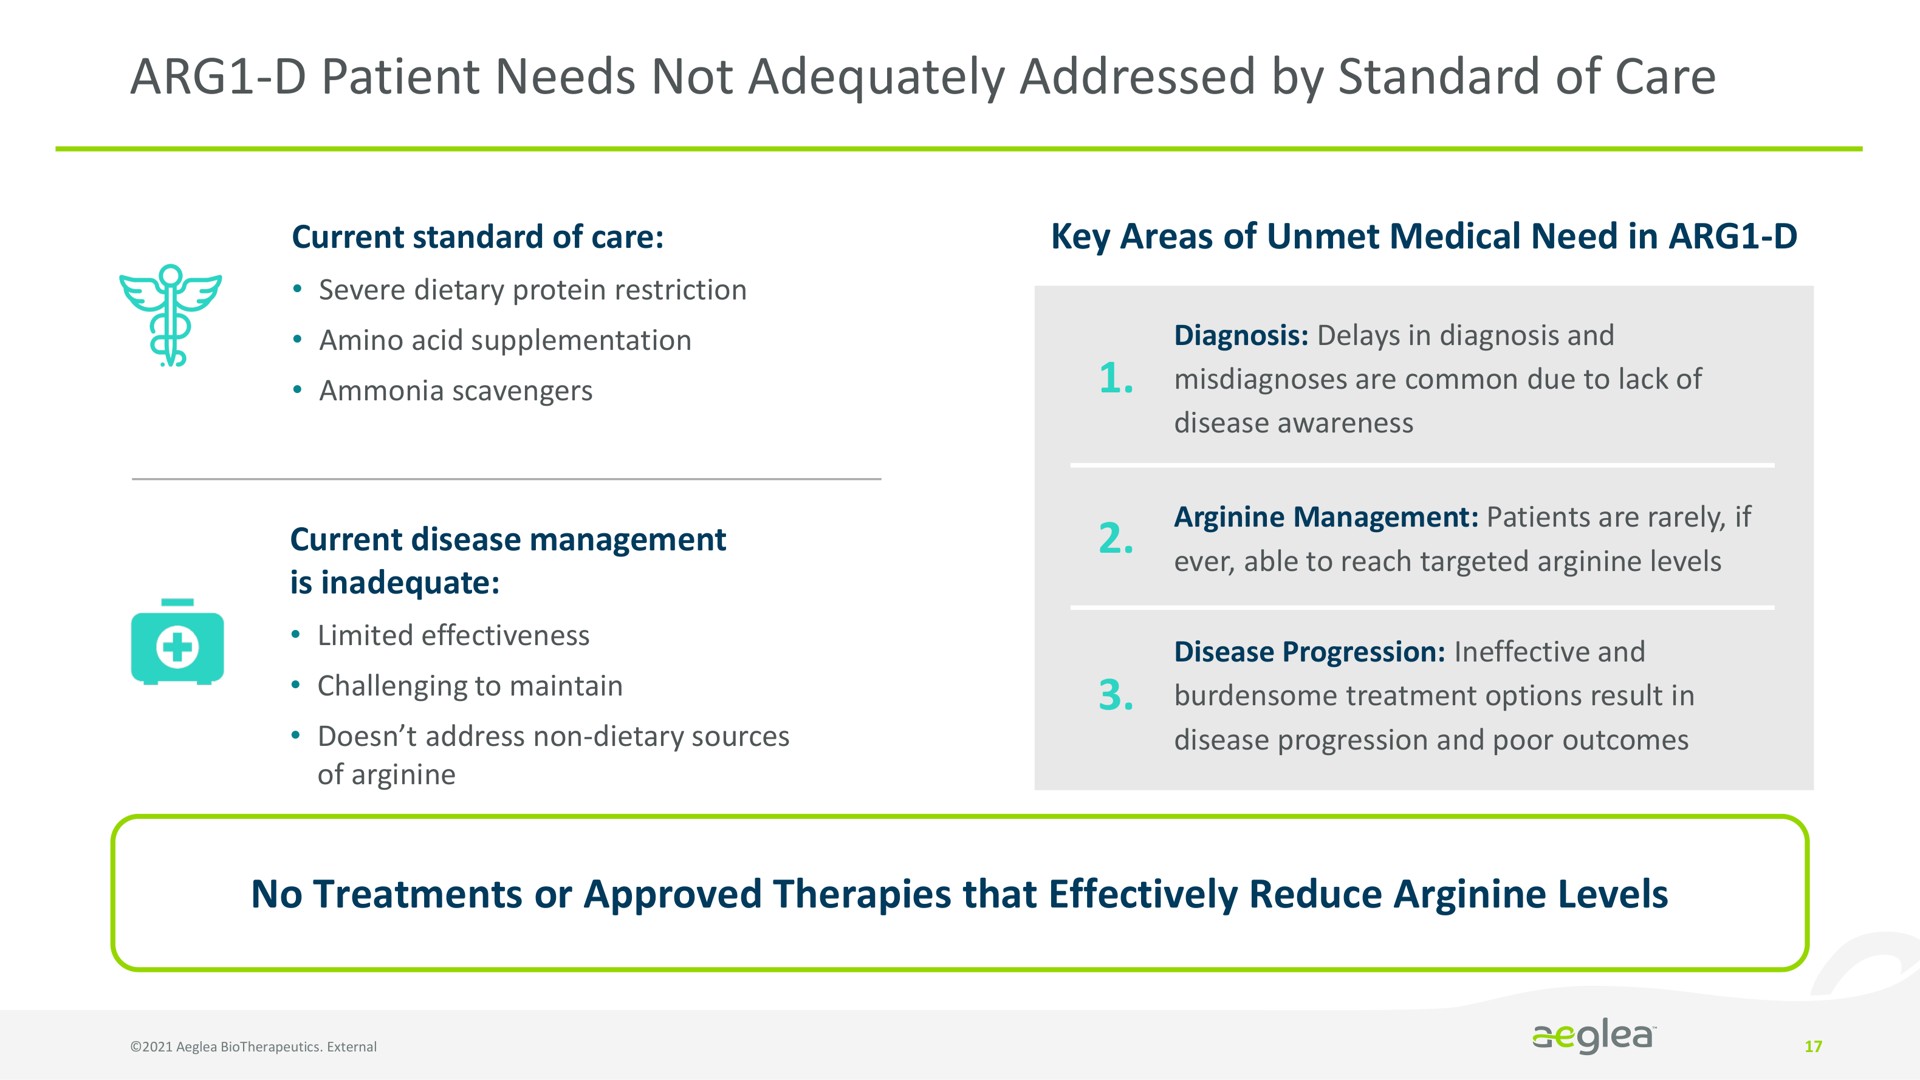 patient needs not adequately addressed by standard of care | Aeglea BioTherapeutics